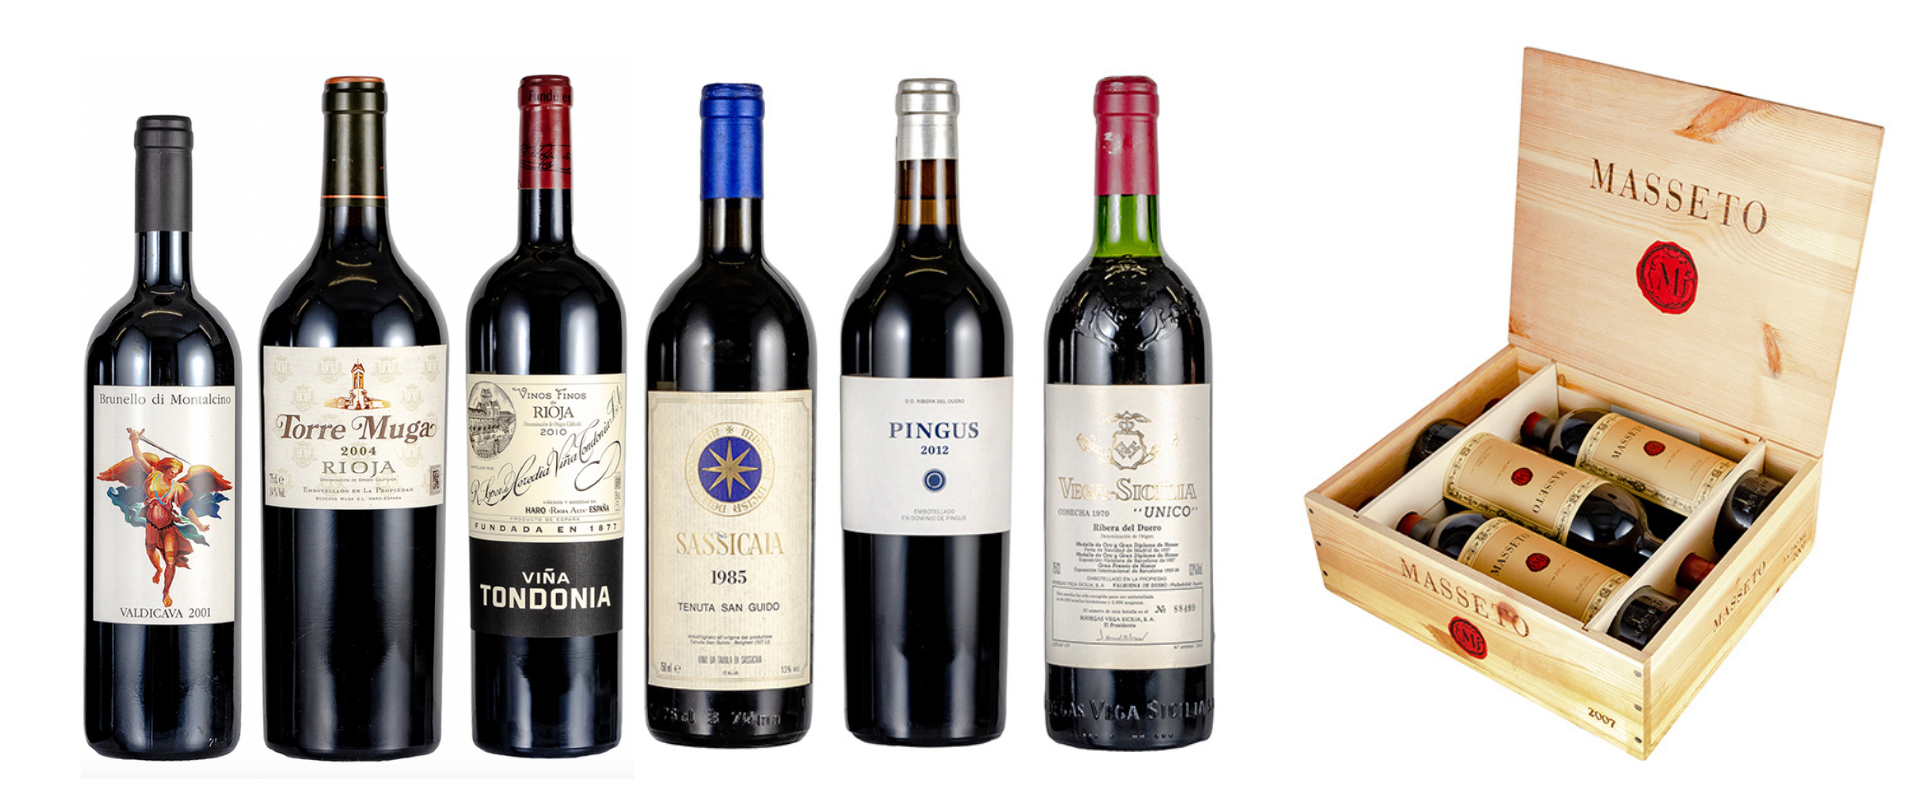 JOHANNESBURG AUCTION WEEK: Rare and Fine Wine from Italy and Spain